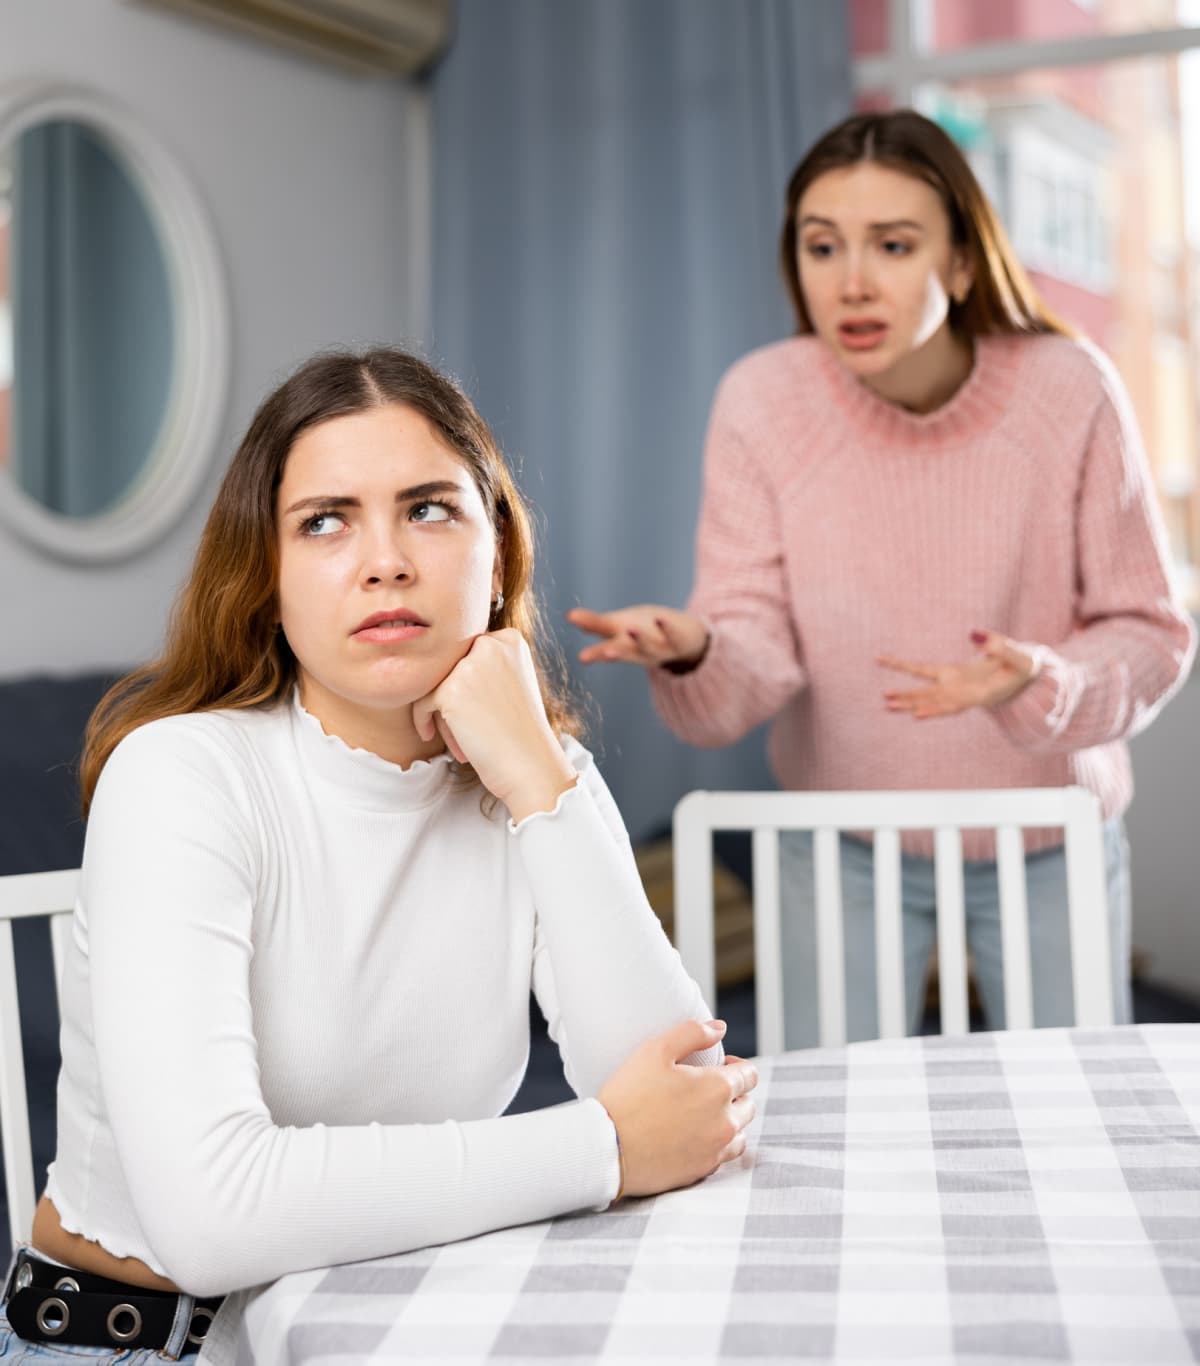 Young woman promptly ignoring another that is speaking to her